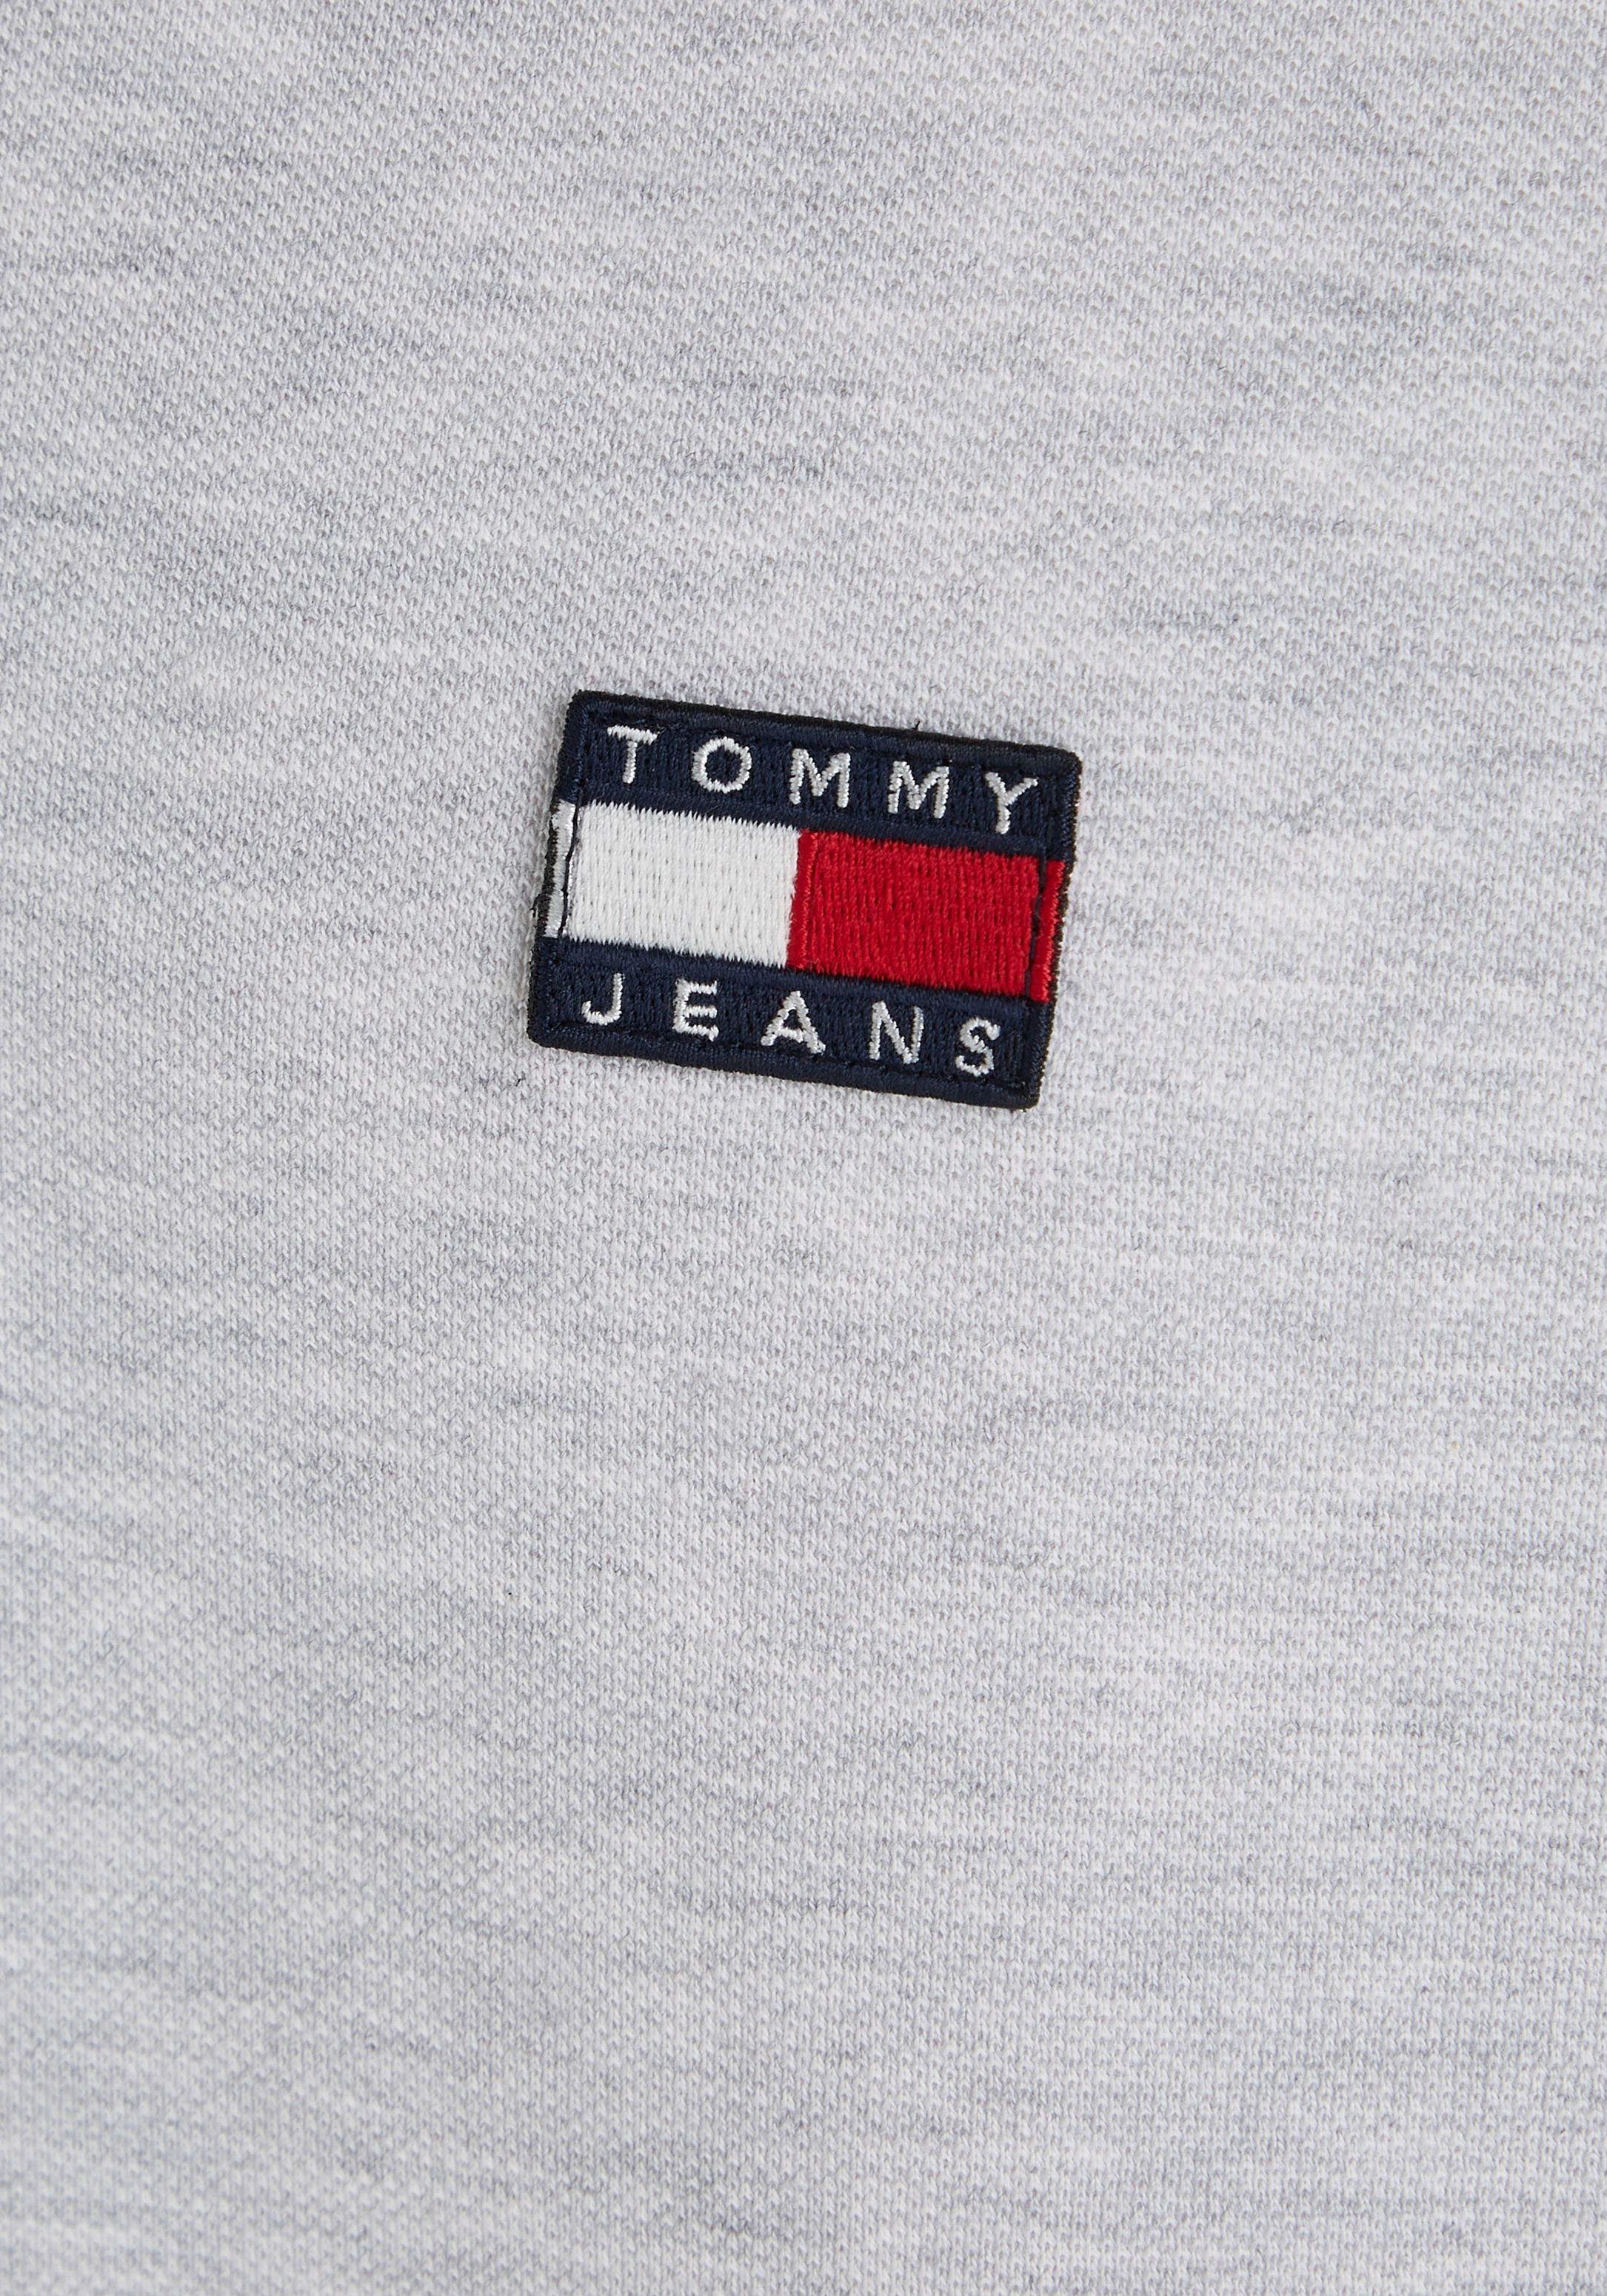 CLSC Silver DETAIL TIPPING Htr Jeans TJM Grey Poloshirt Tommy POLO